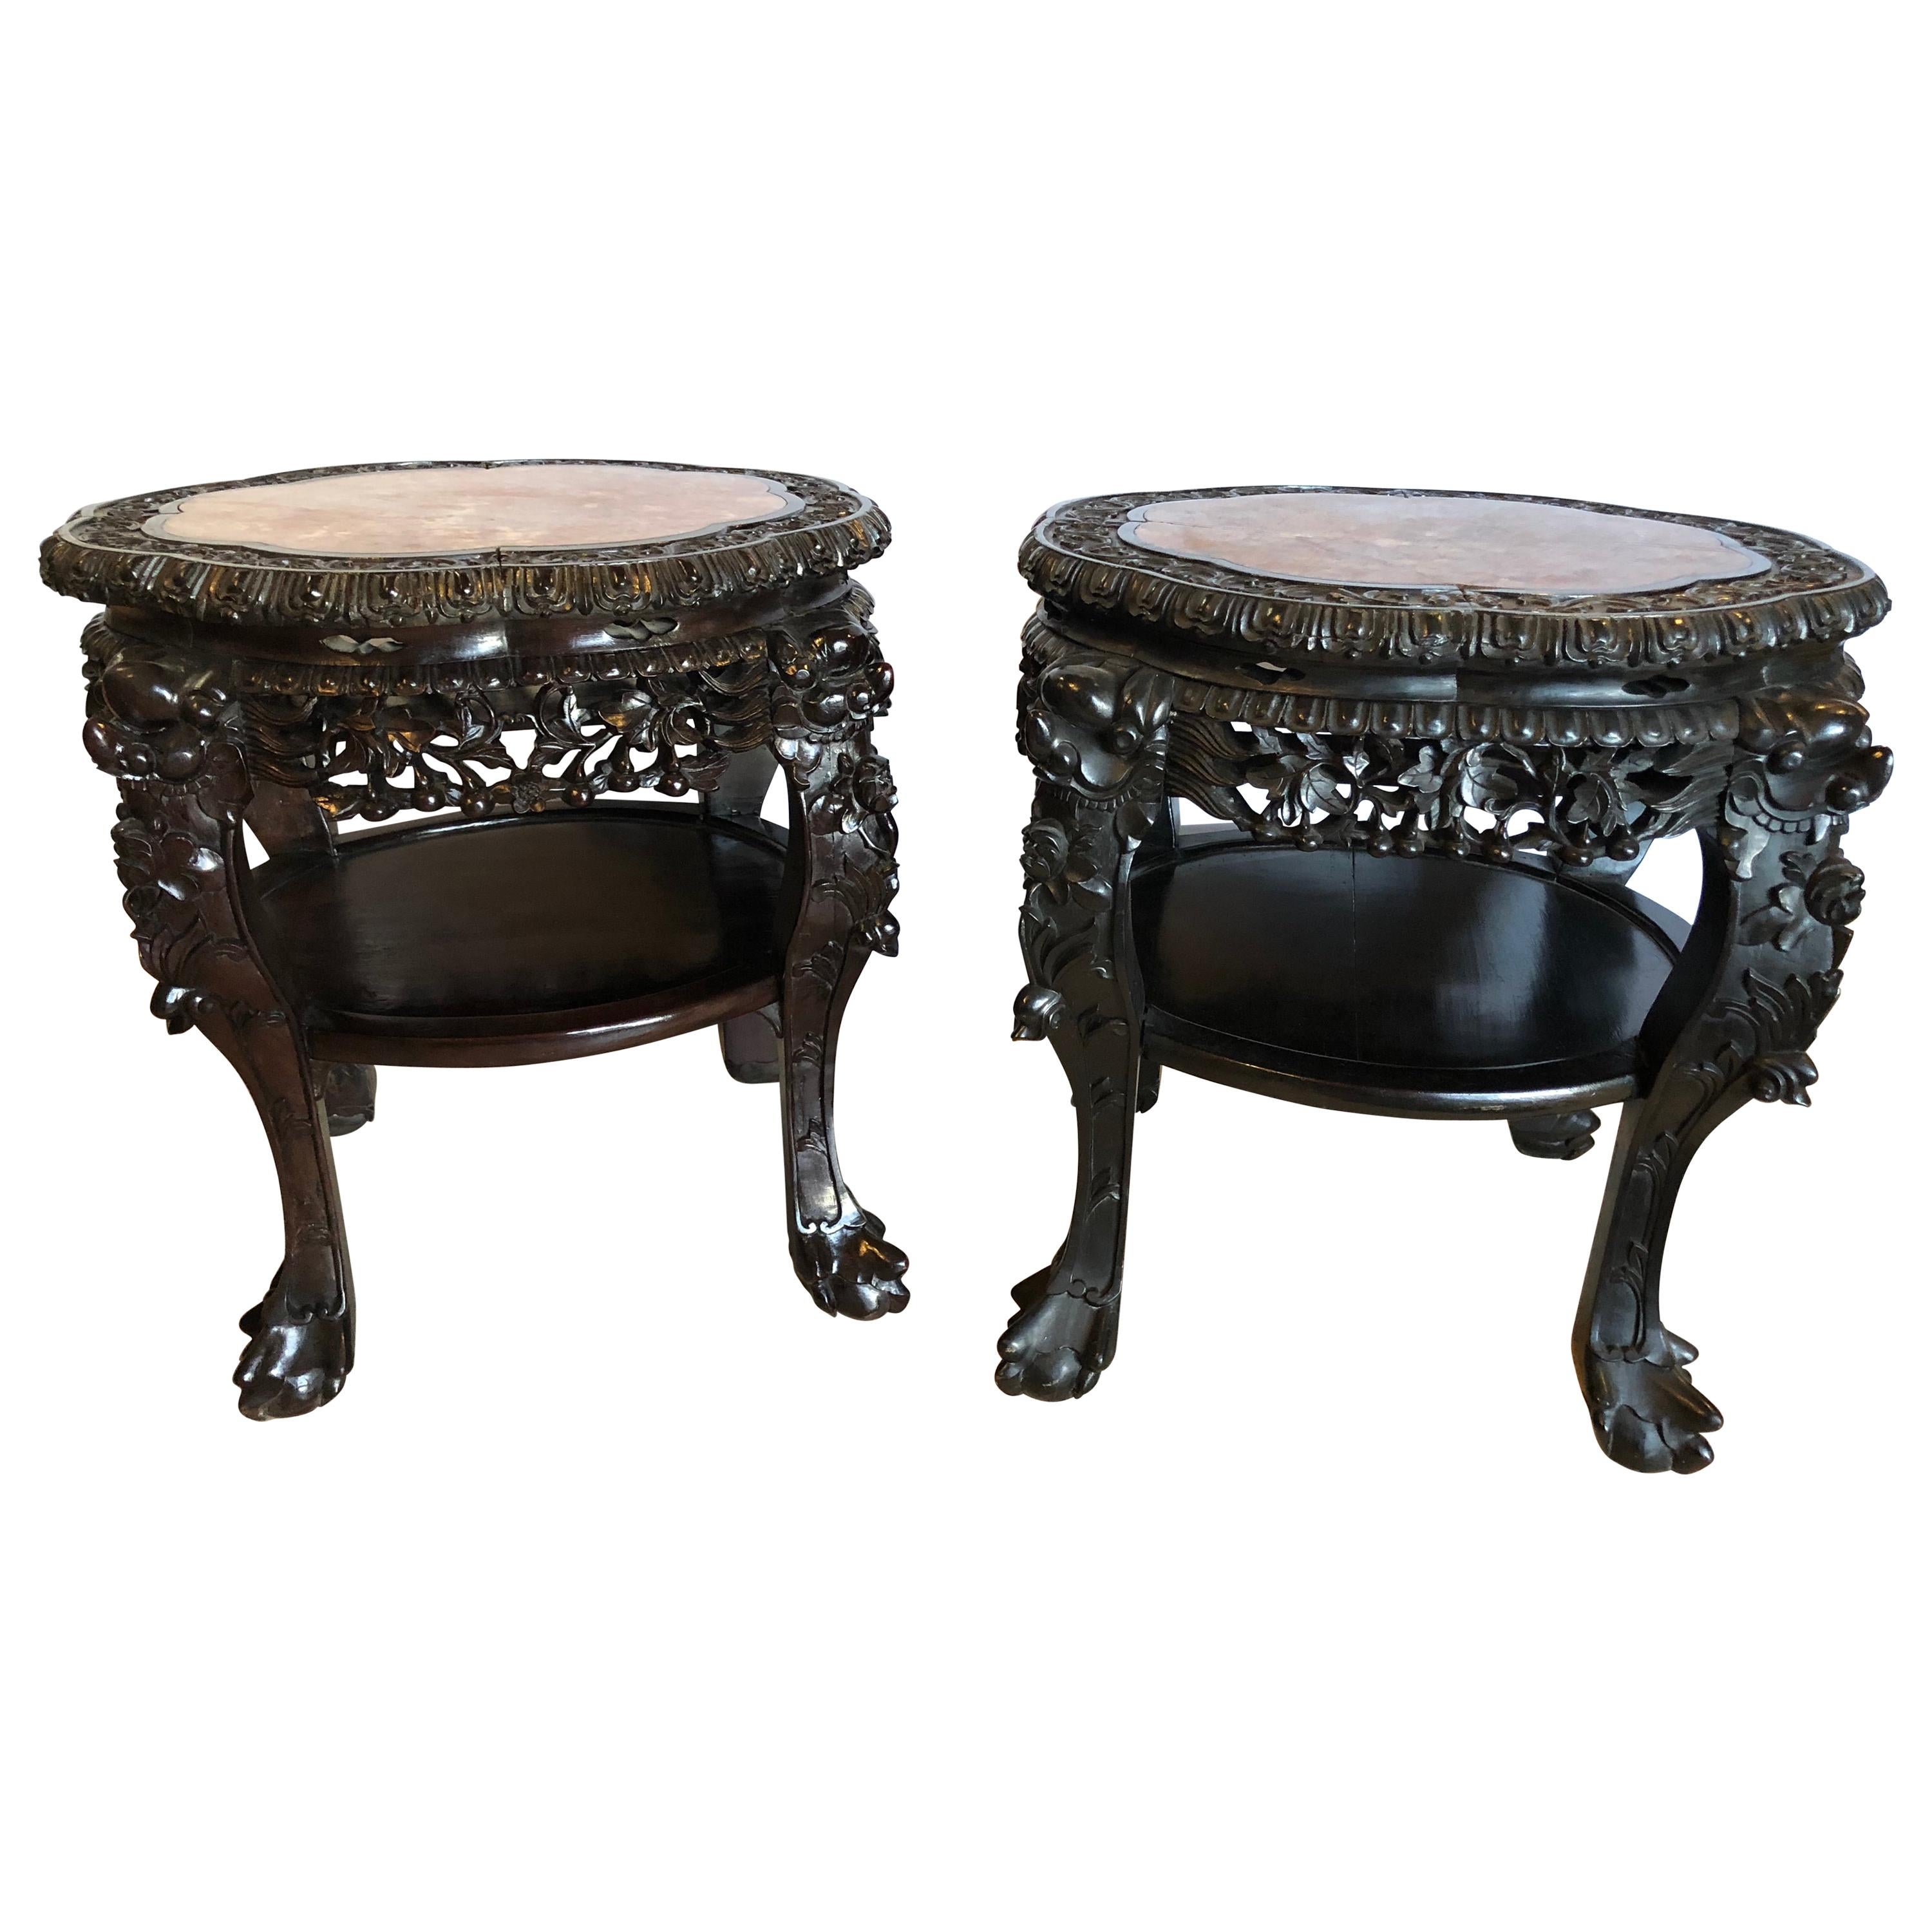 Pair of Chinese 19 Century Teak-Wood Marble Top Stands or End Tables